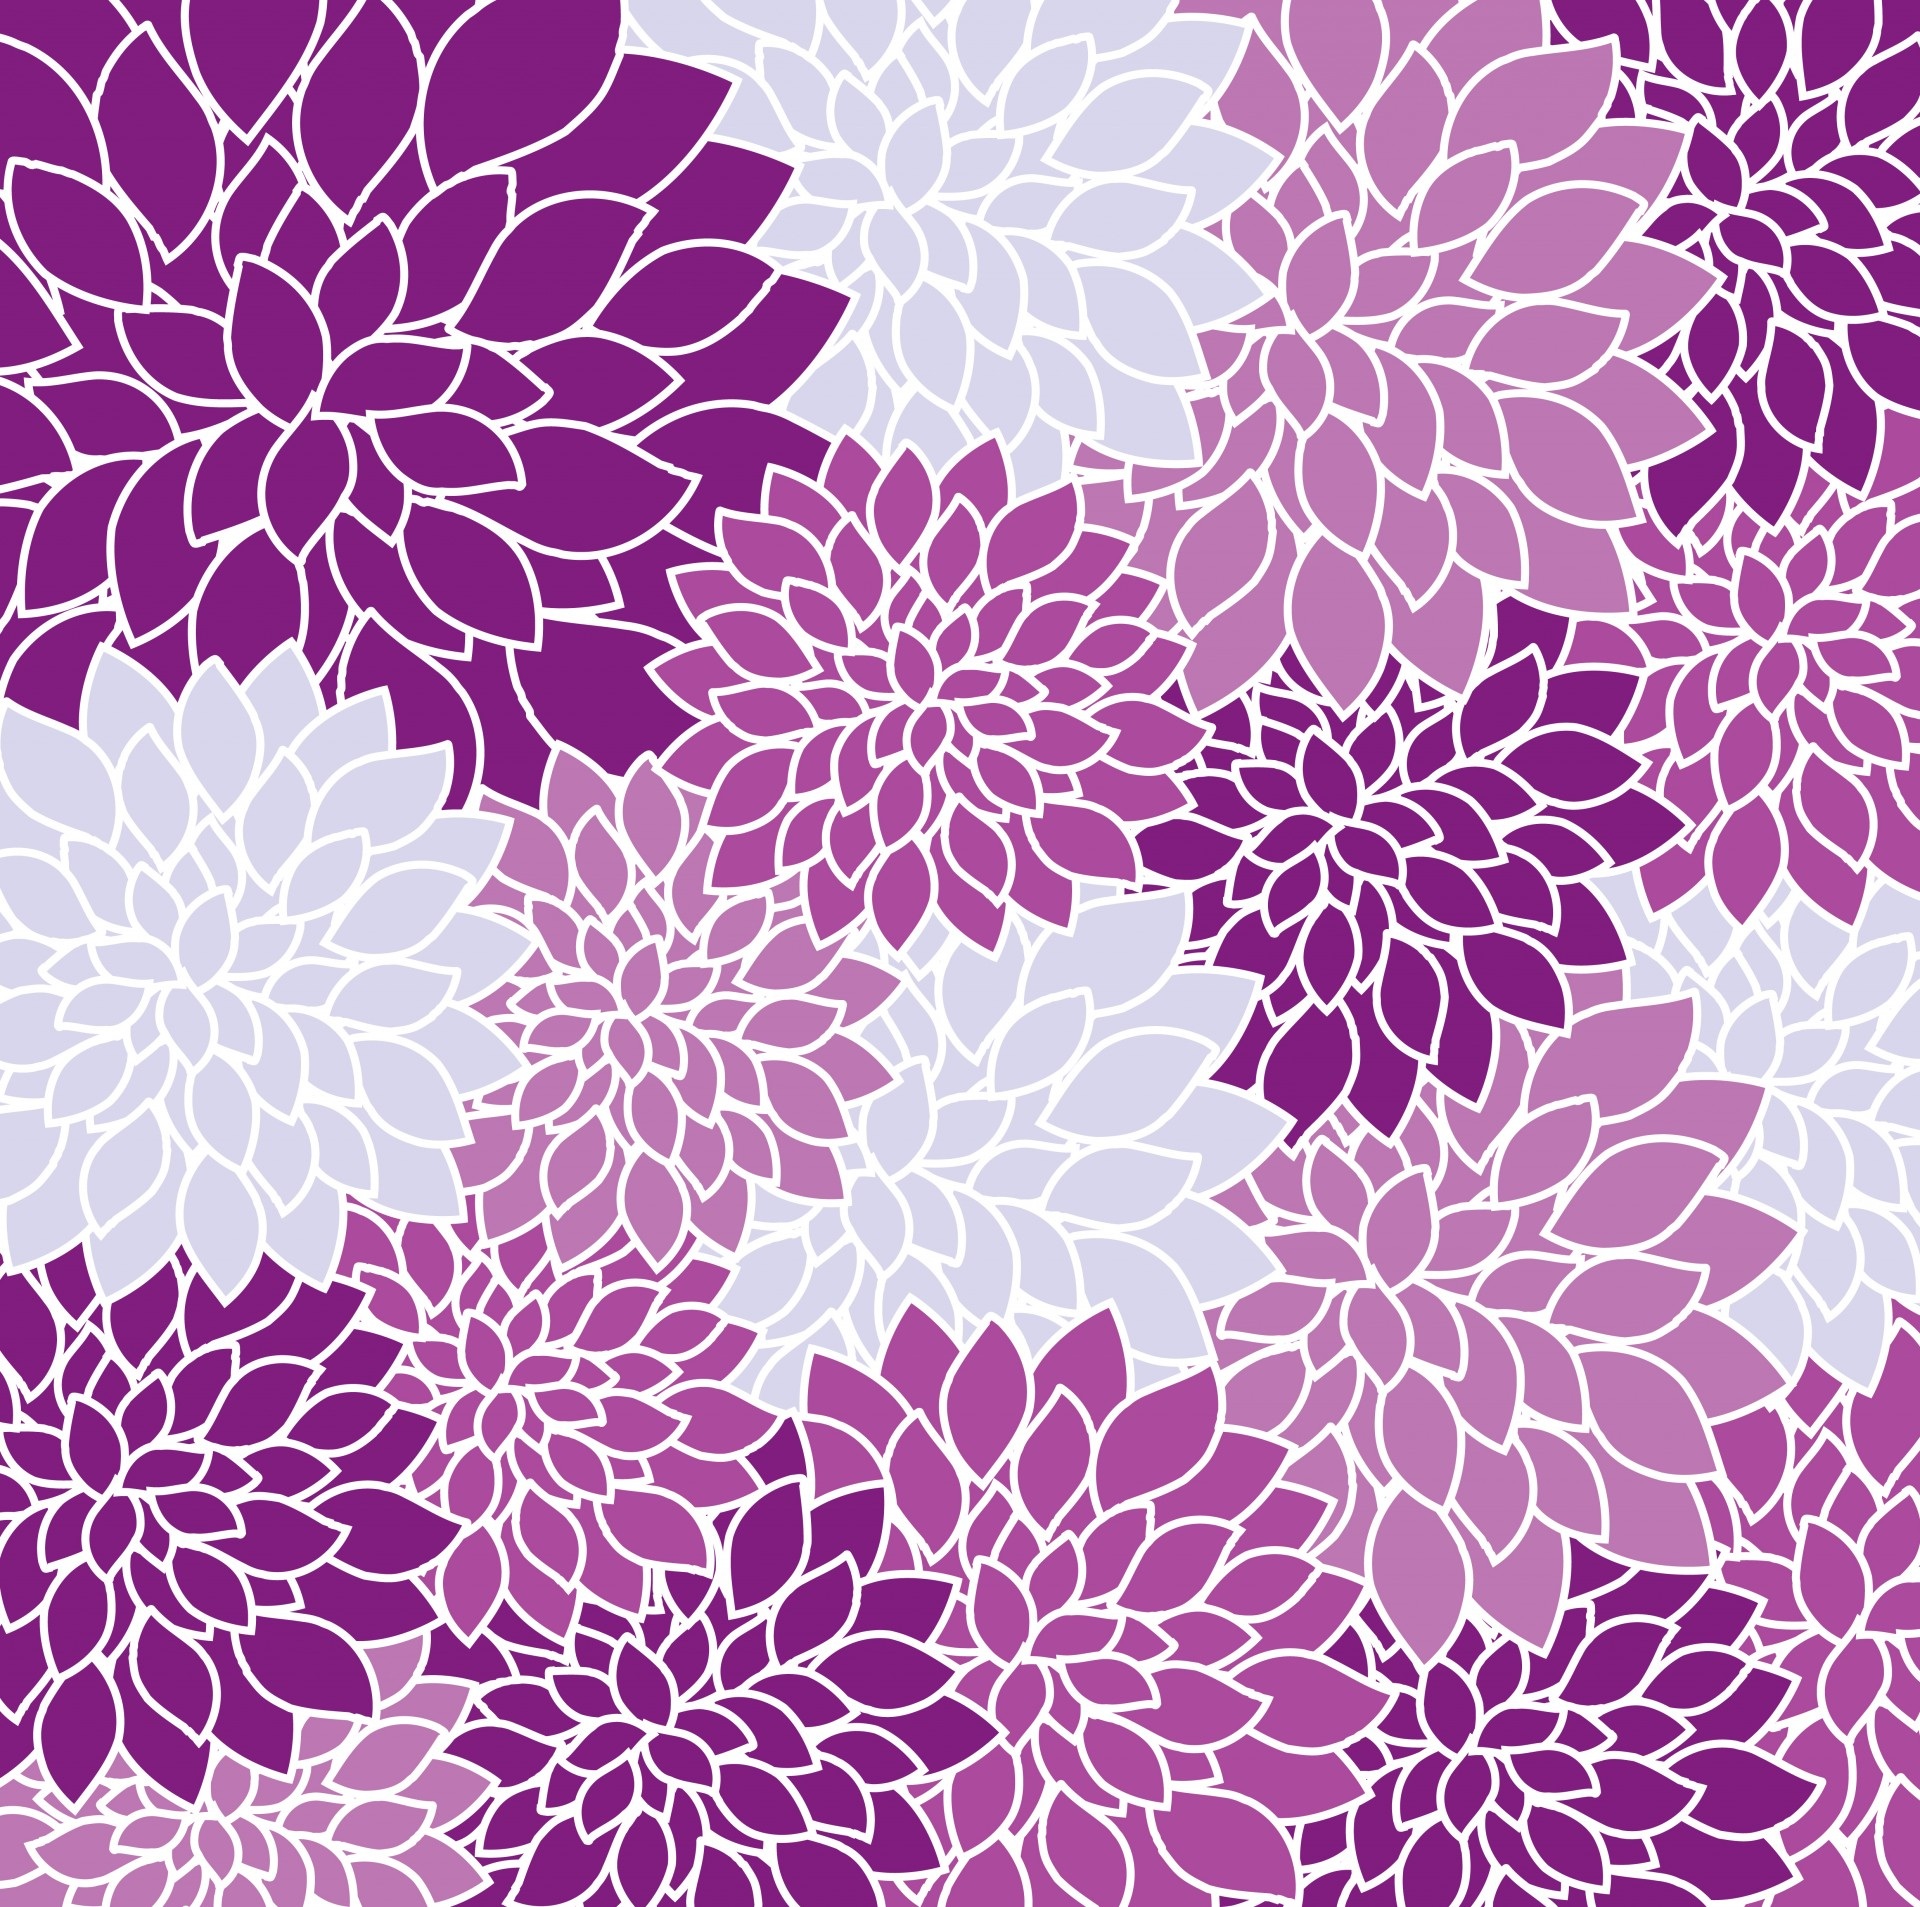 Floral Wallpaper With Purple Violet And White Dahlia Flowers Drawing Free Image Download